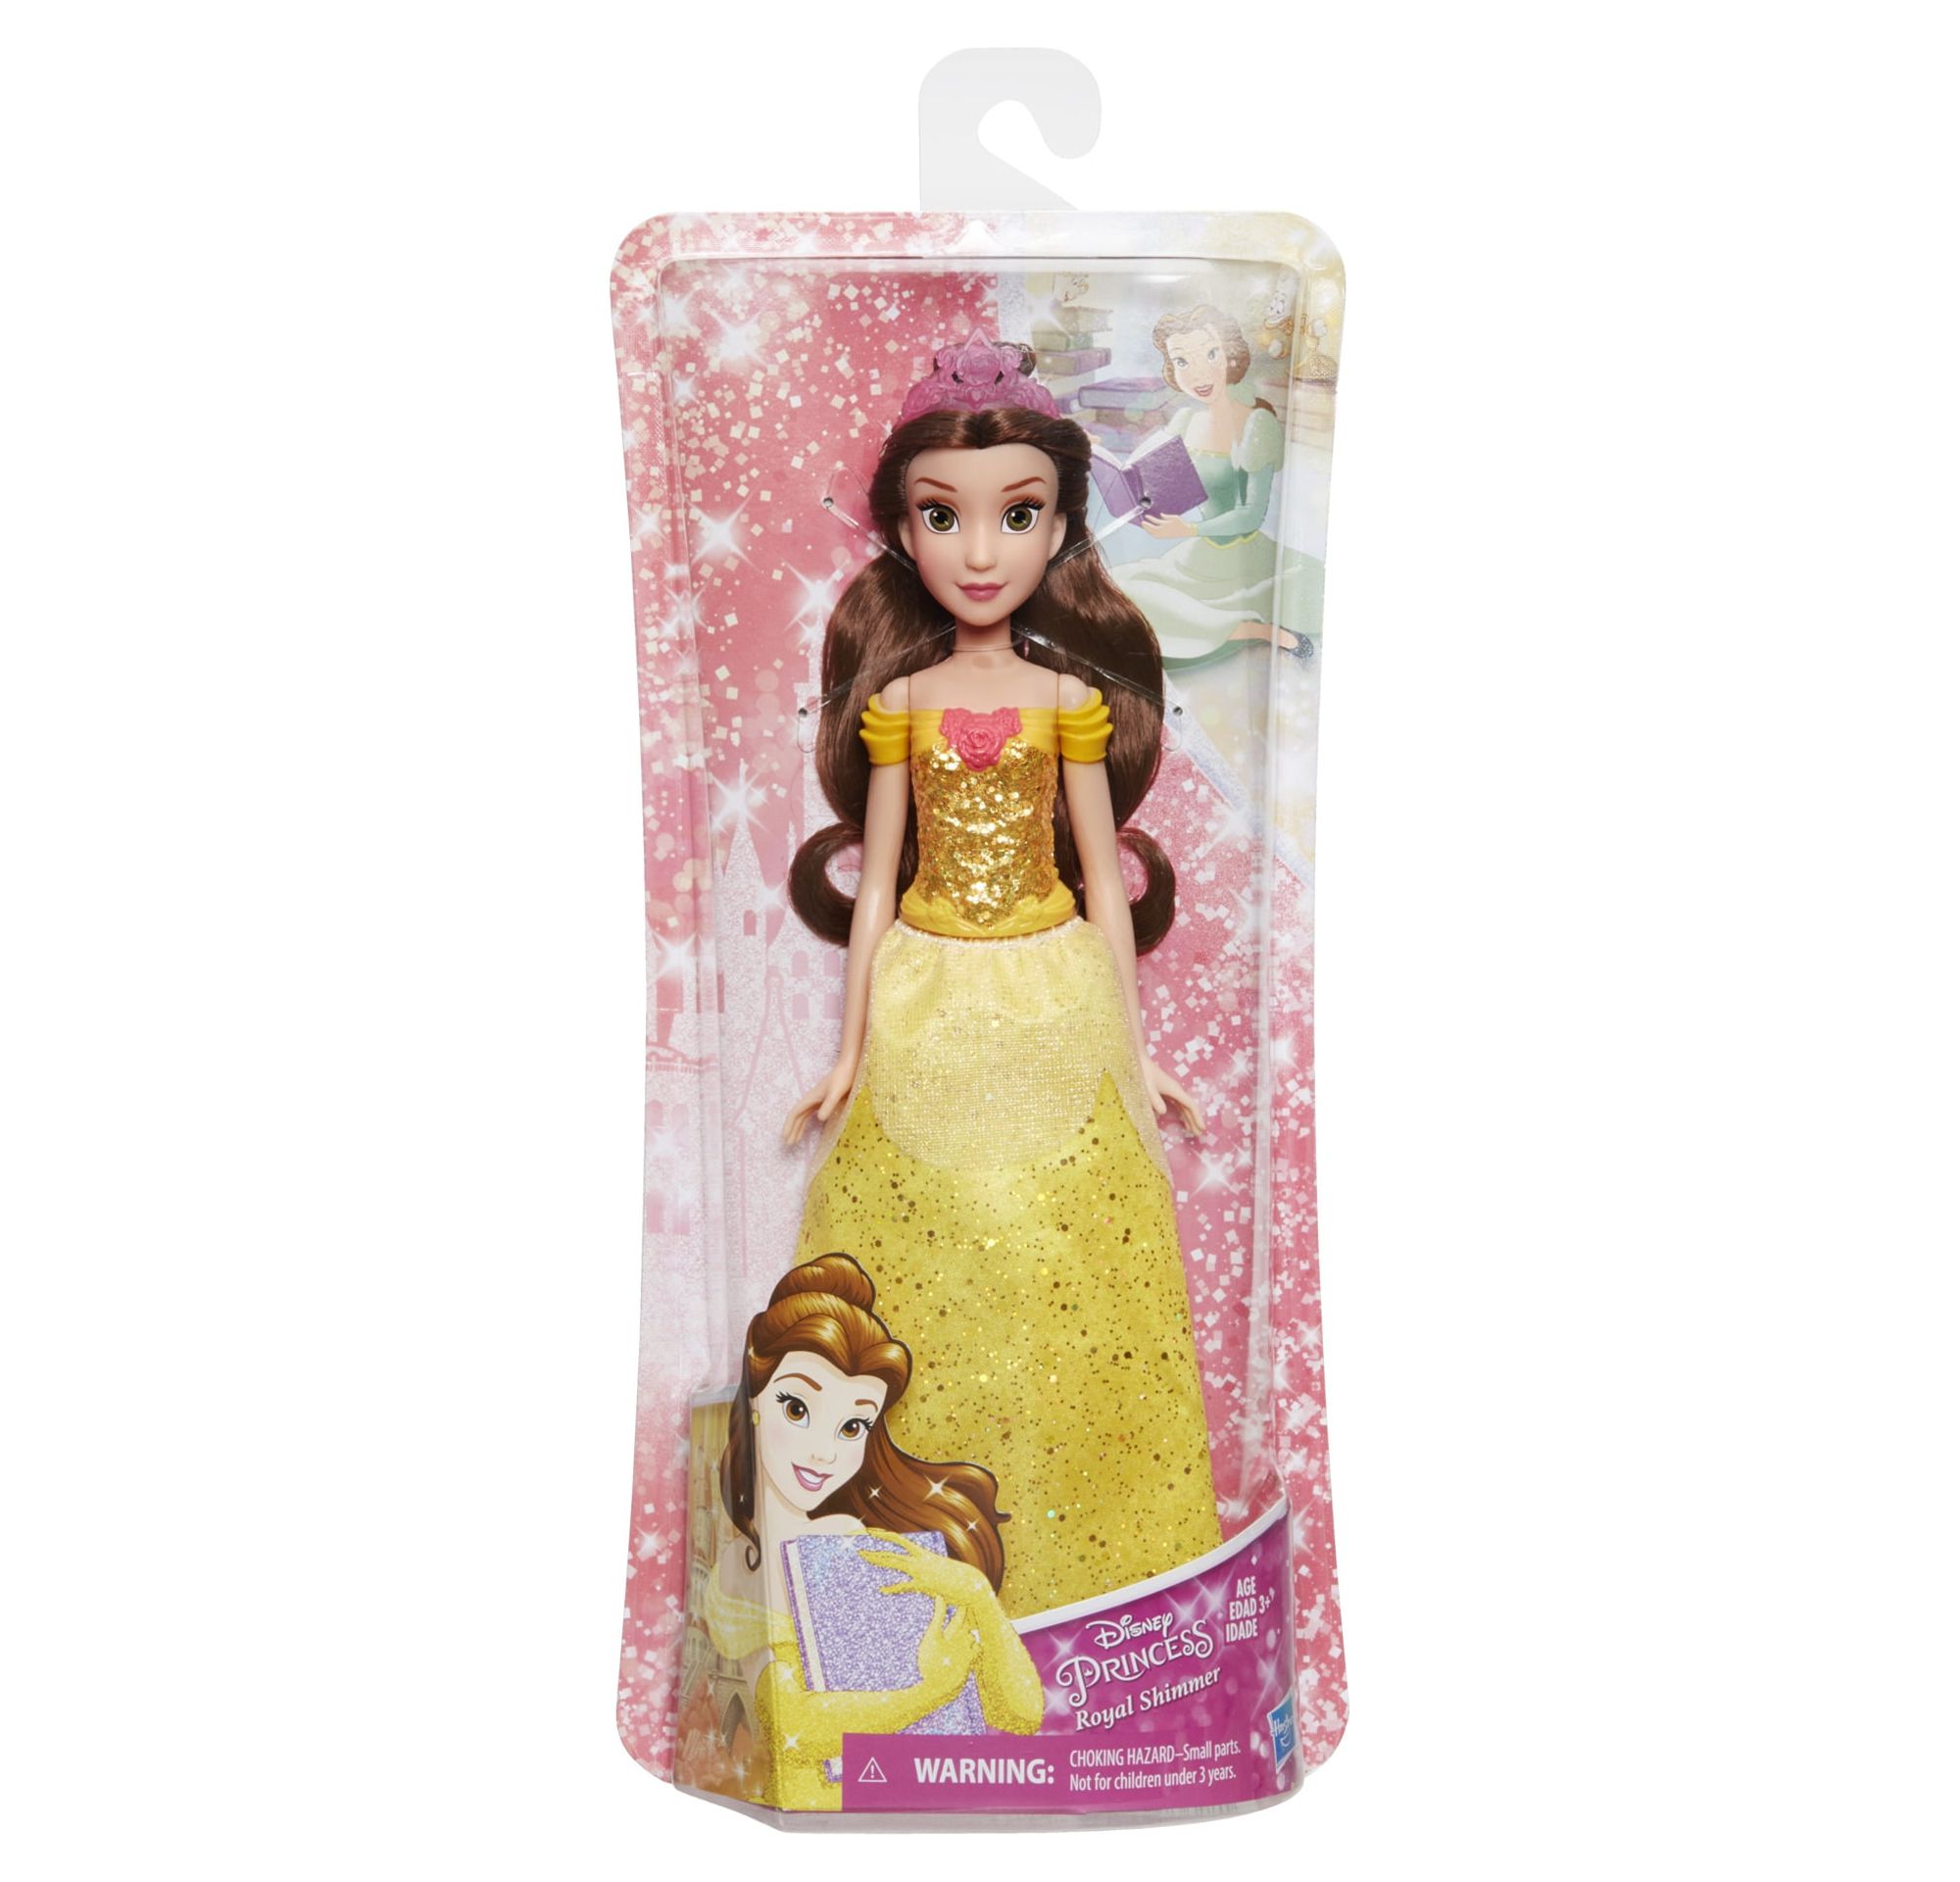 Disney Princess Royal Shimmer Belle with Sparkly Skirt, Includes Tiara and Shoes - image 2 of 16